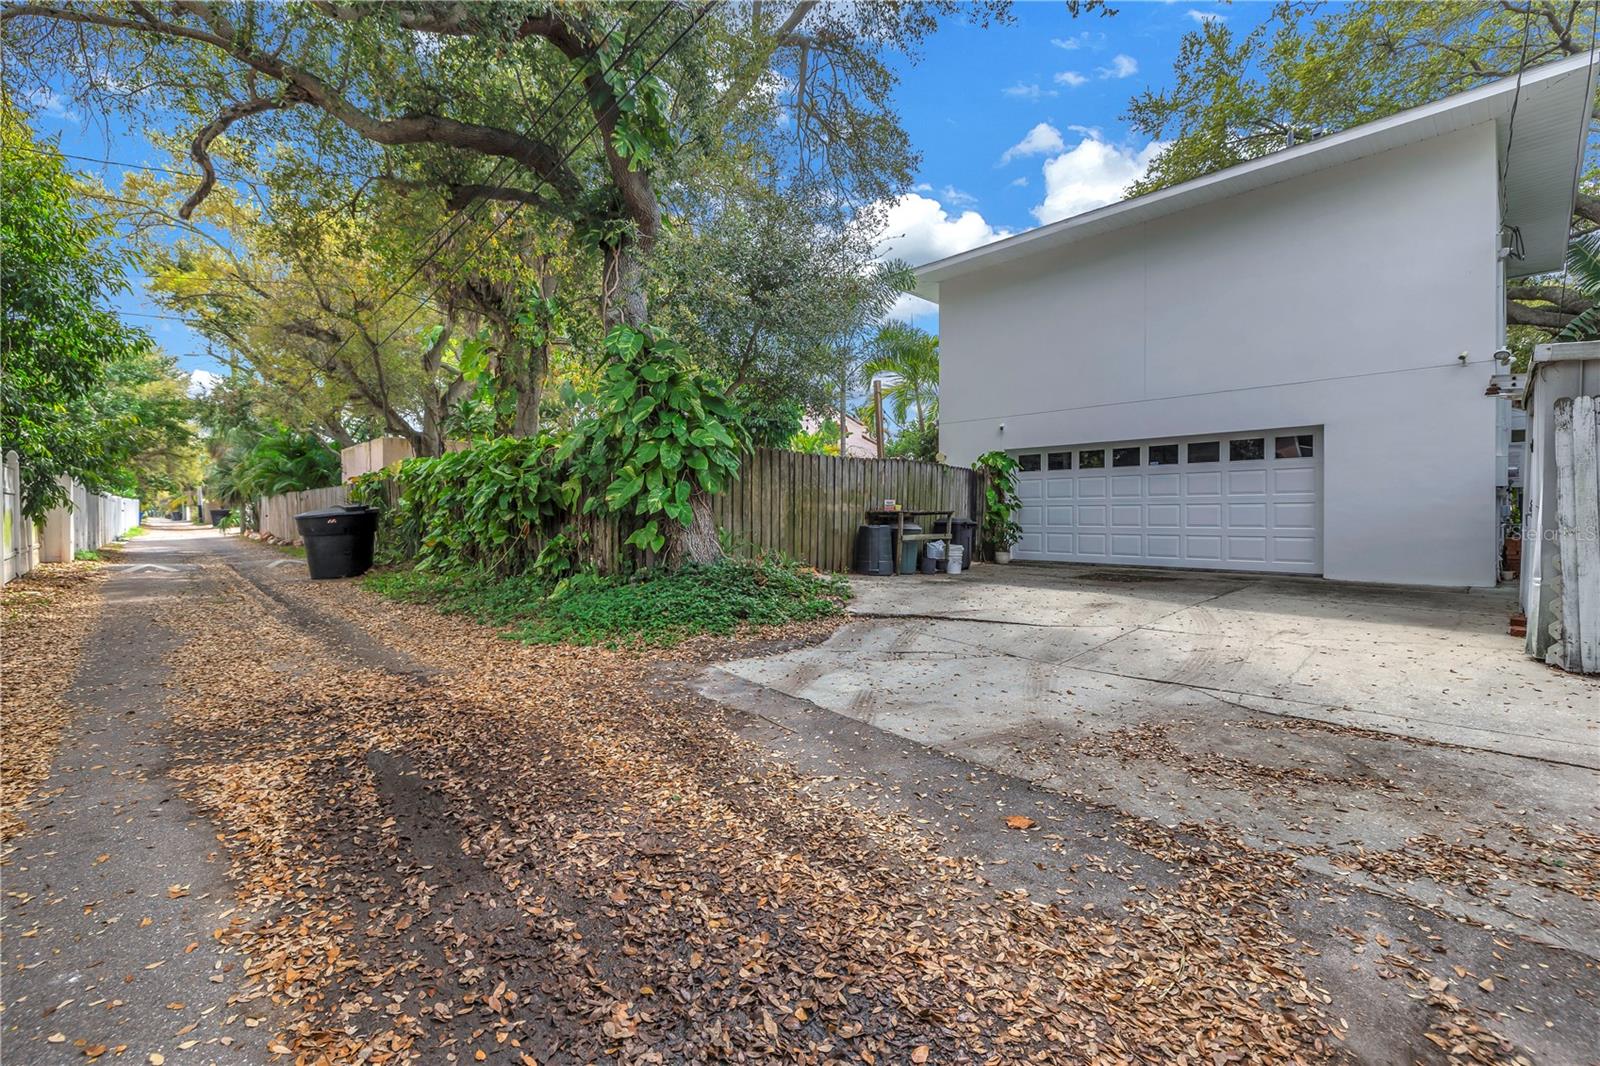 Alley access on the waterfront? This is very rare! 2 driveways on this amazing property.